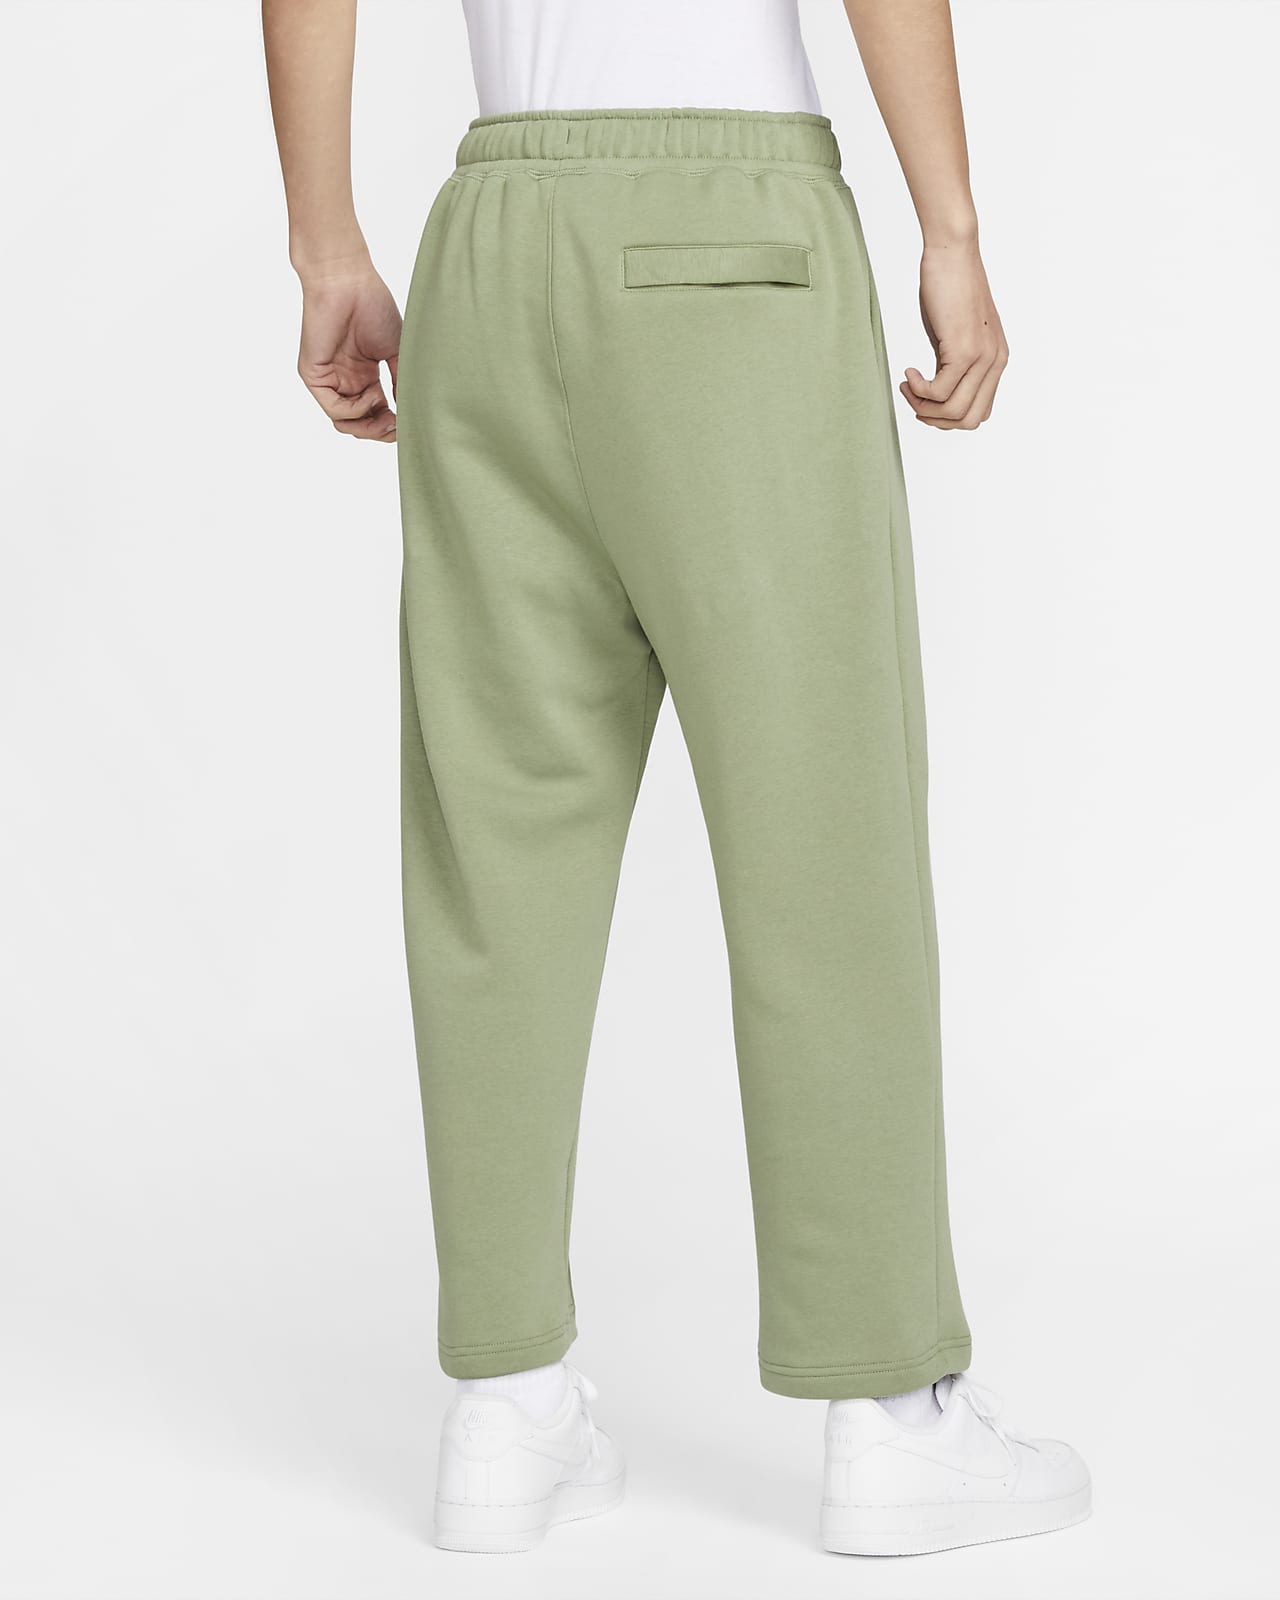 The Best Cropped Trousers For Men You Can Buy This Summer | FashionBeans